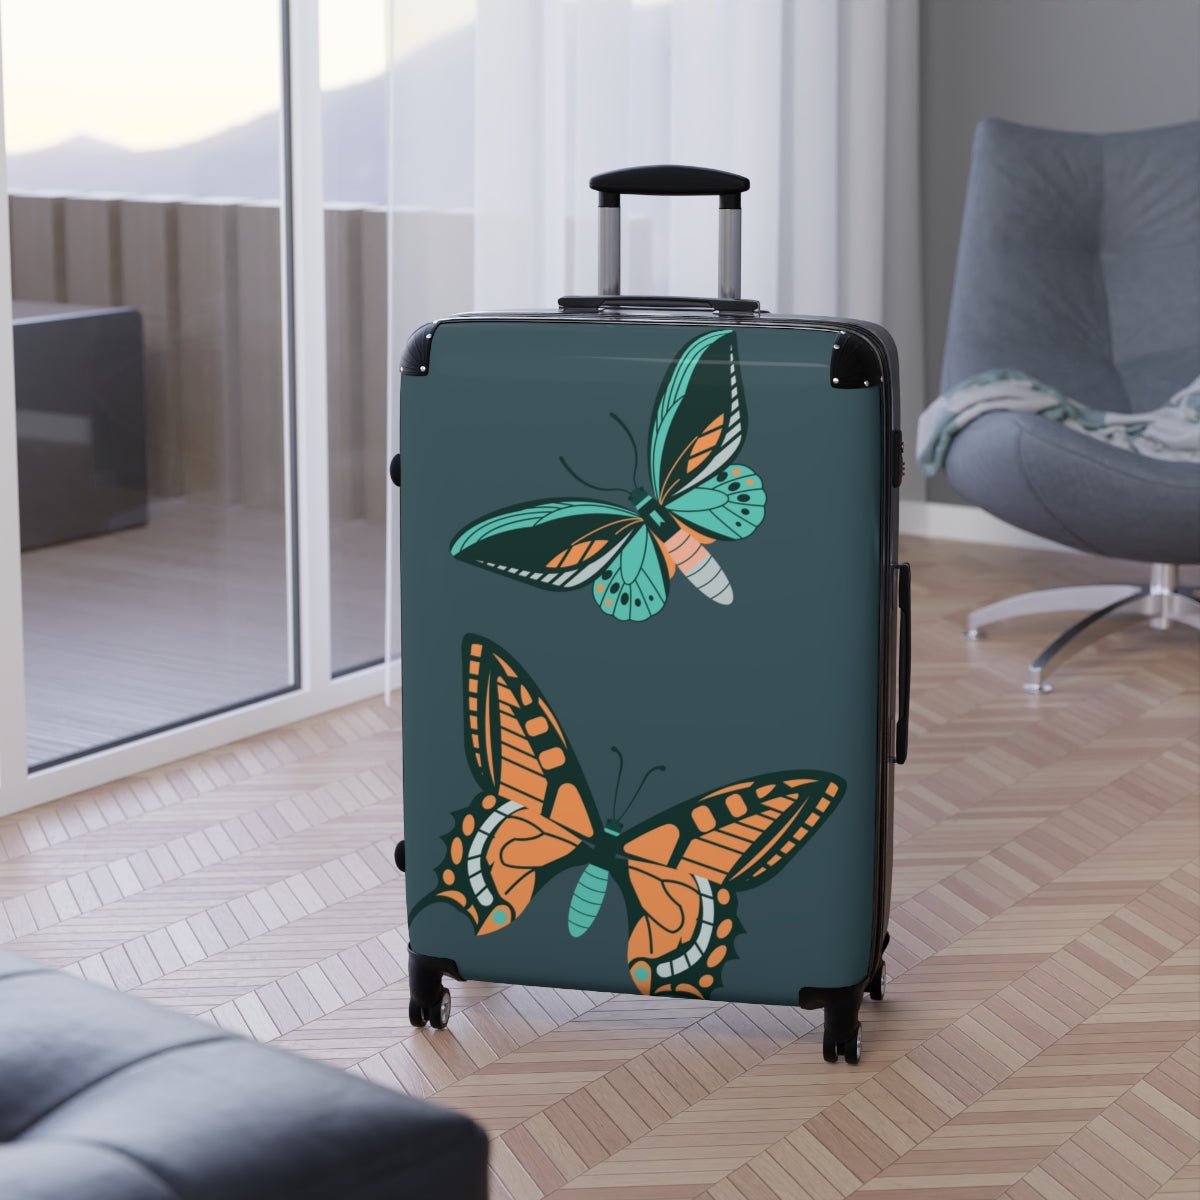 BUTTERFLY SUITCASE SET ARTZIRA, Cabin Suitcase Carry-On Luggage, Trolly Travel Bags Double Wheeled Spinners, Men's Choice